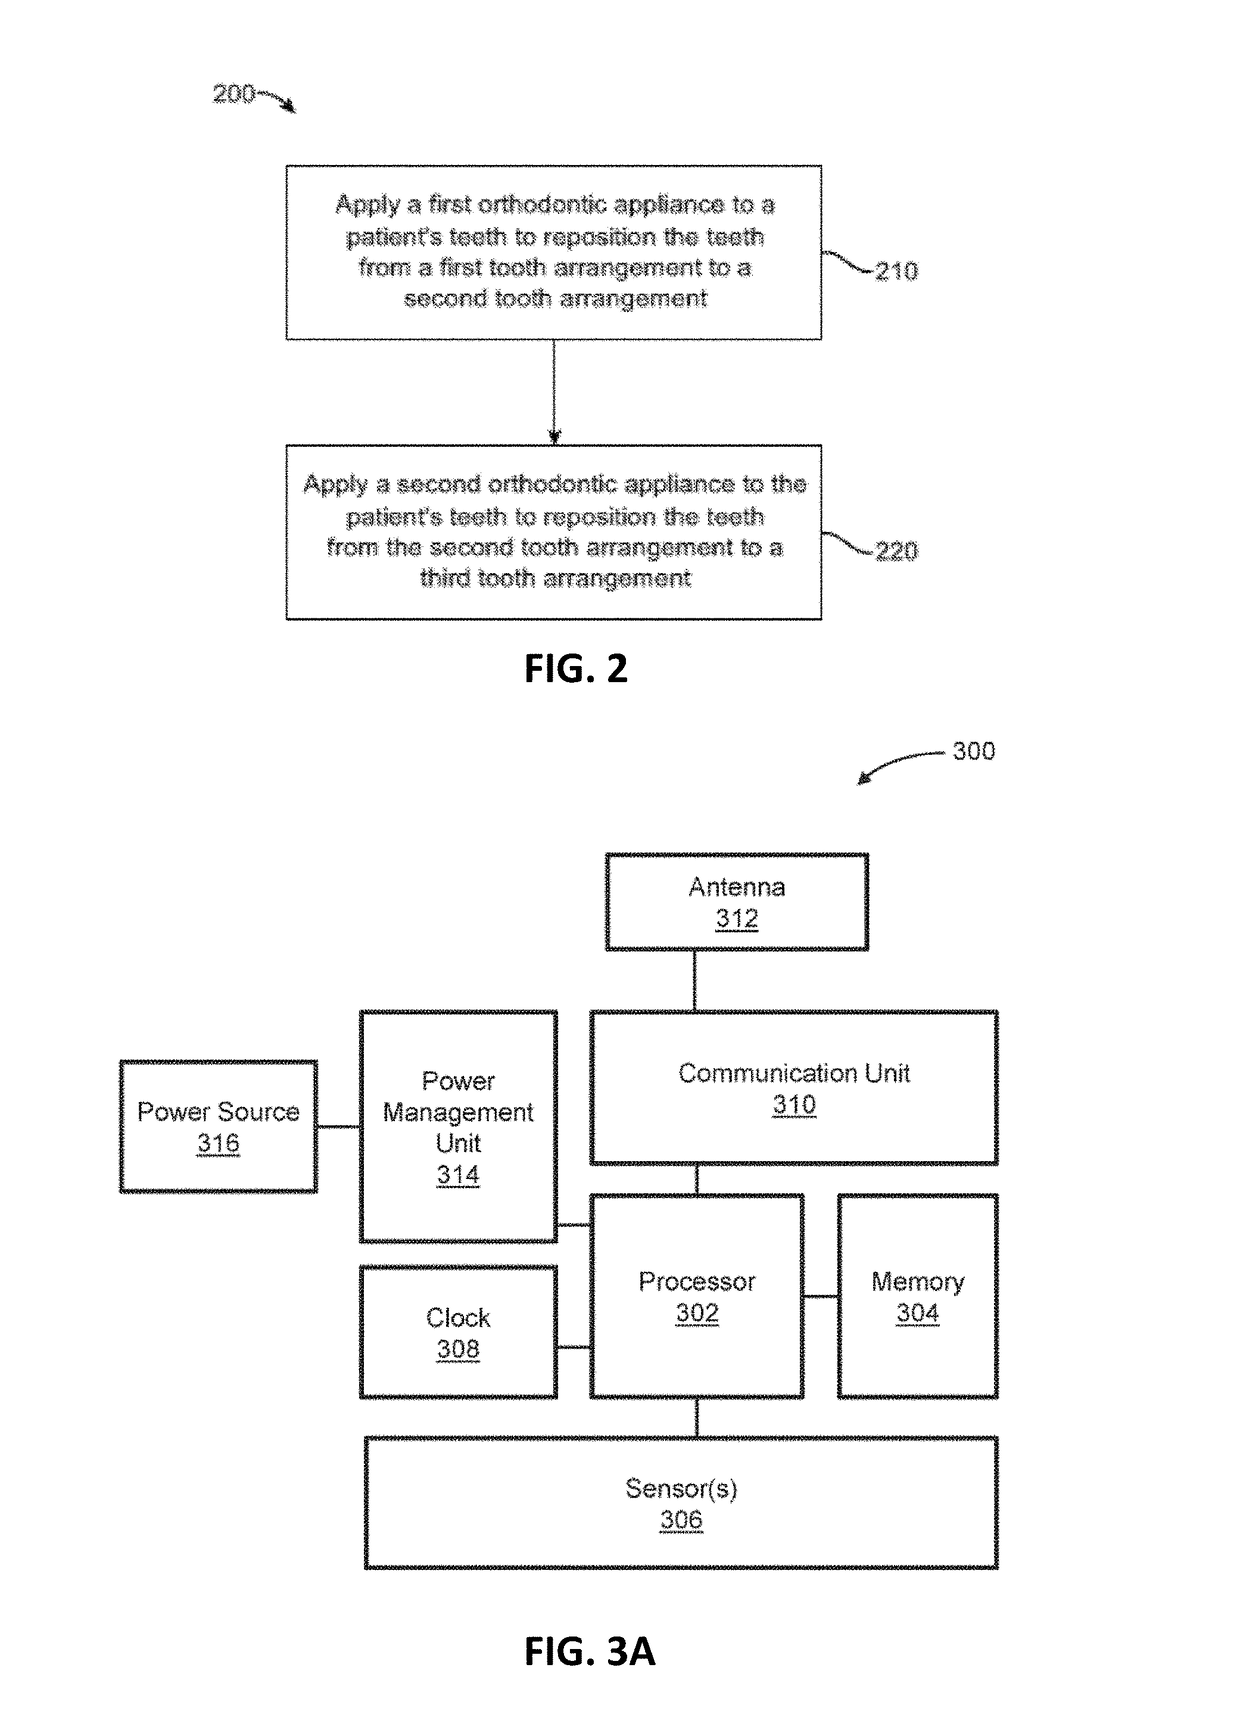 Intraoral appliances with sensing